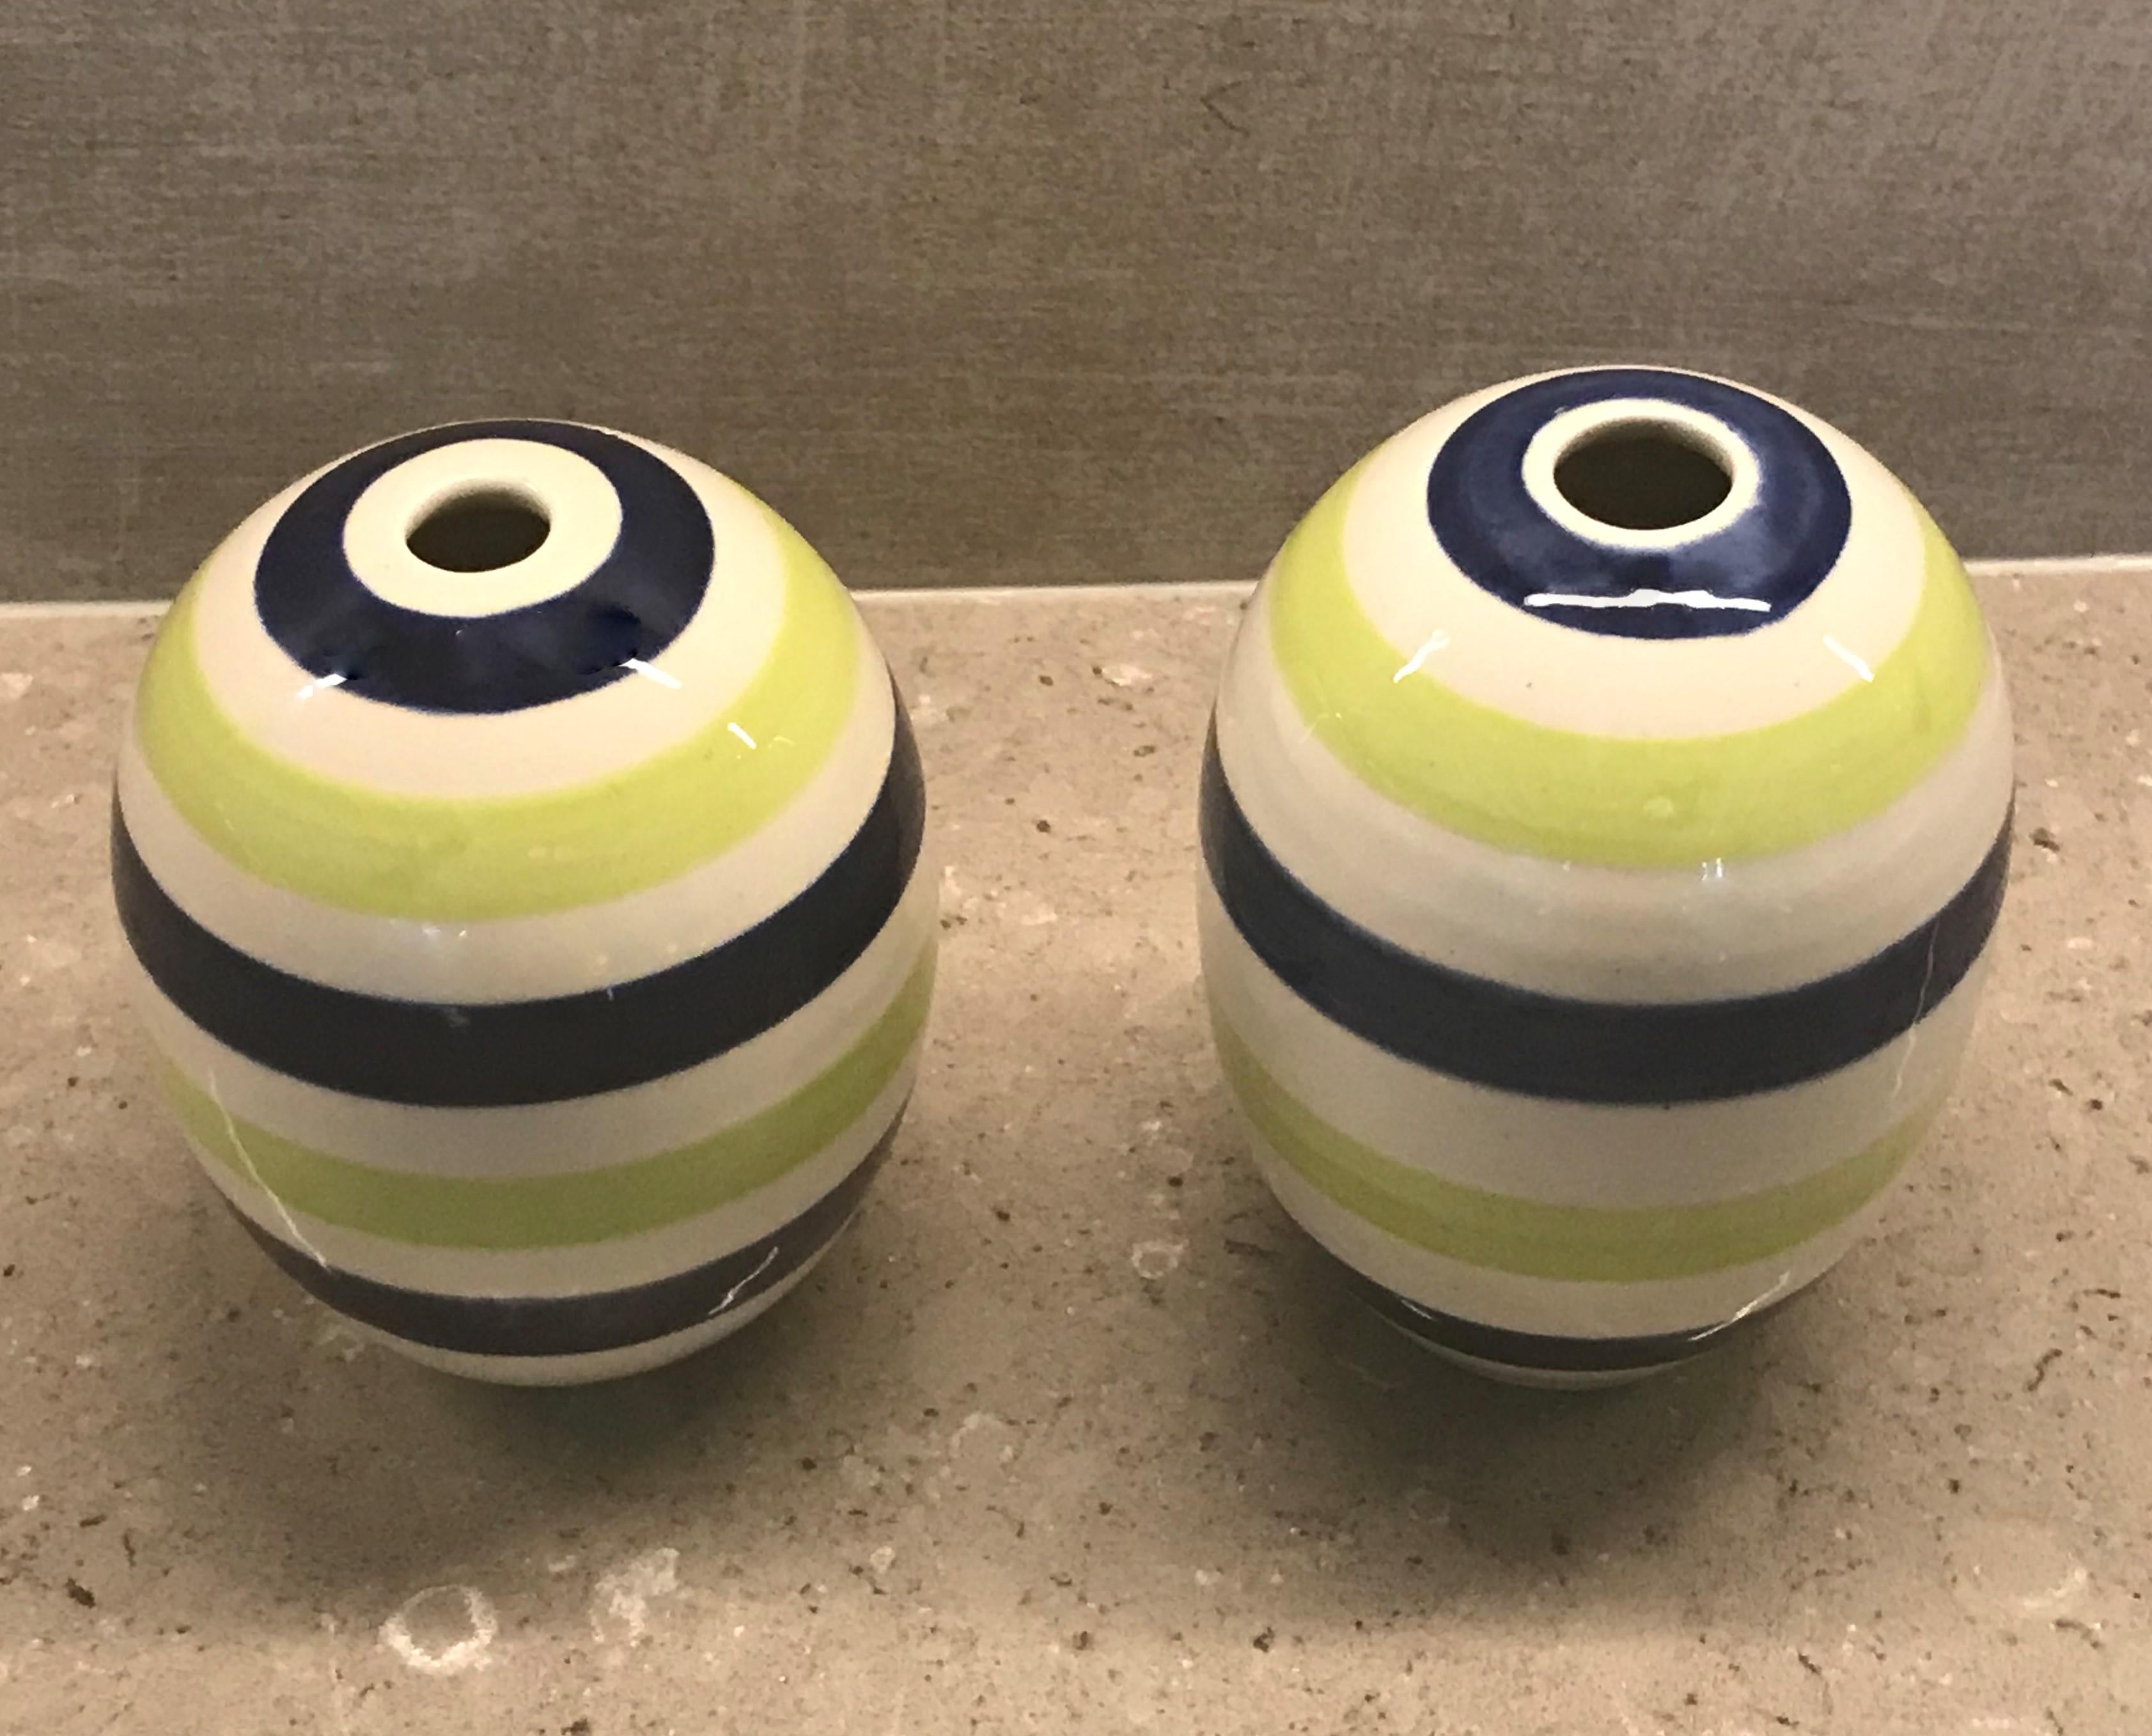 Reduced from $175.....Jonathan Adler exhibited his first ceramic collection in Barney's New York in 1993. In 1998 he opened his first boutique in SOHO New York. These two hand thrown striped bud vases are from one of his early collections in deep